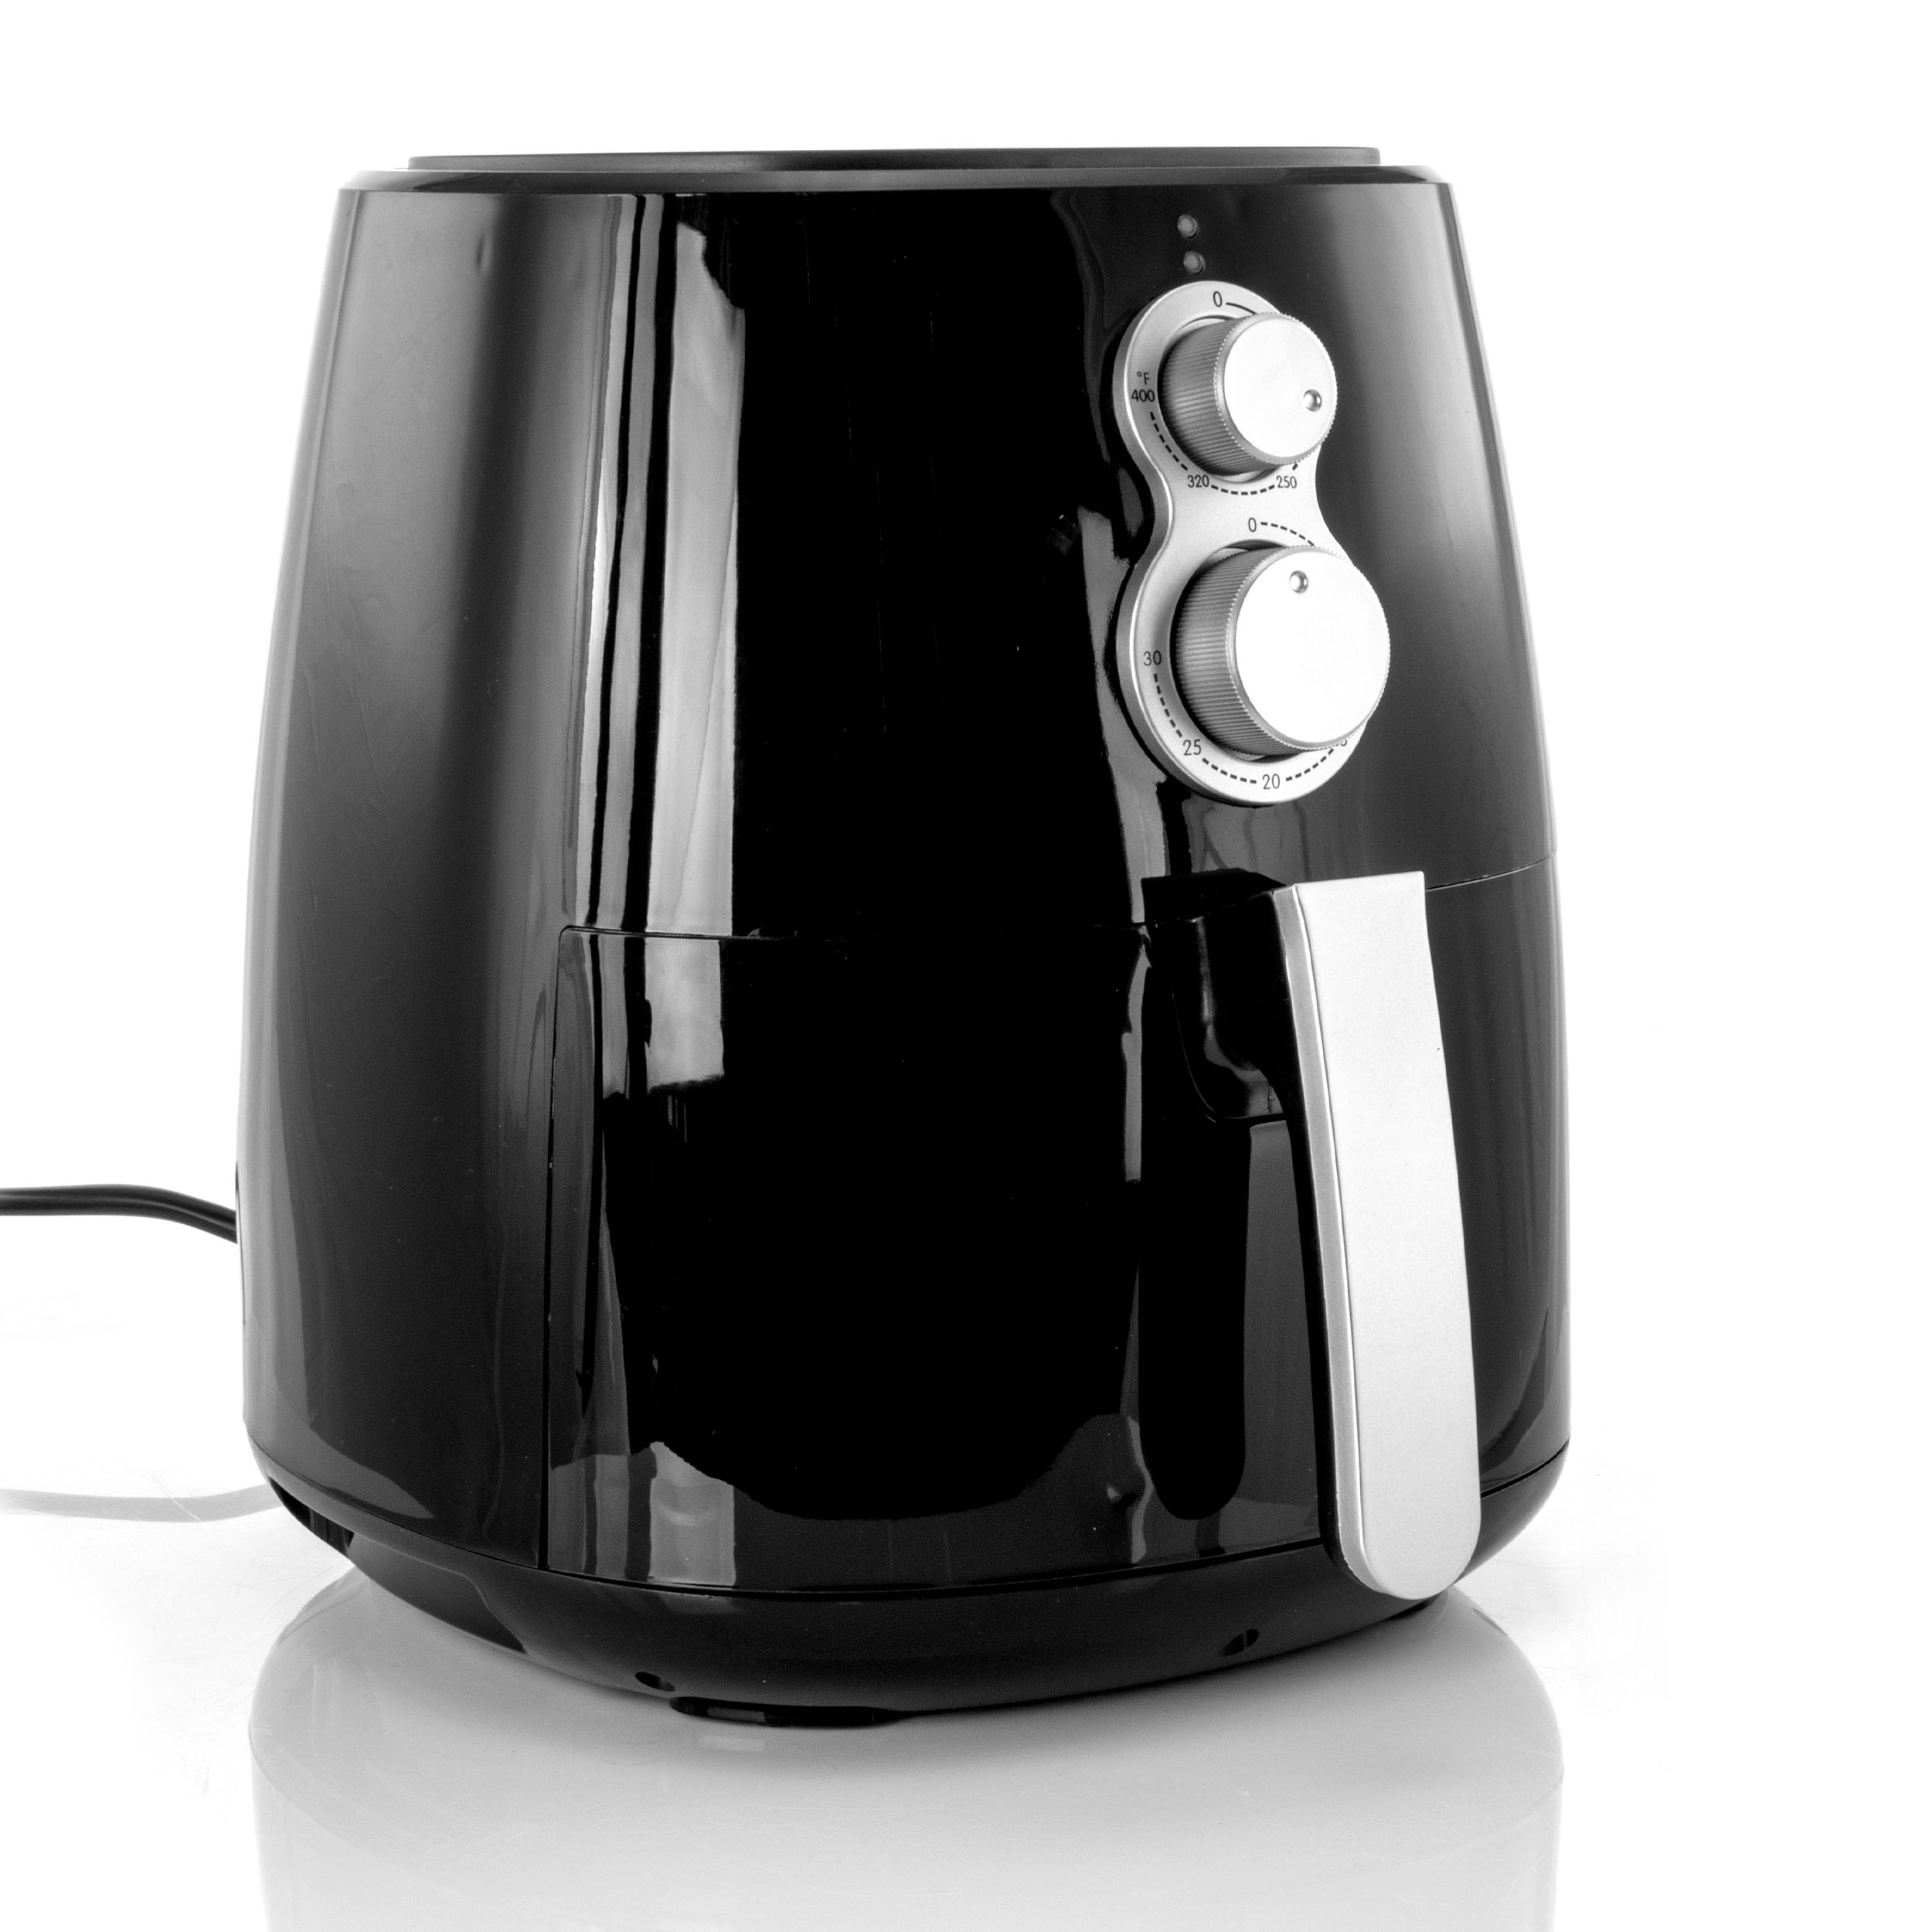 Better Chef 4 Liter Air Fryer In Black - image 2 of 2